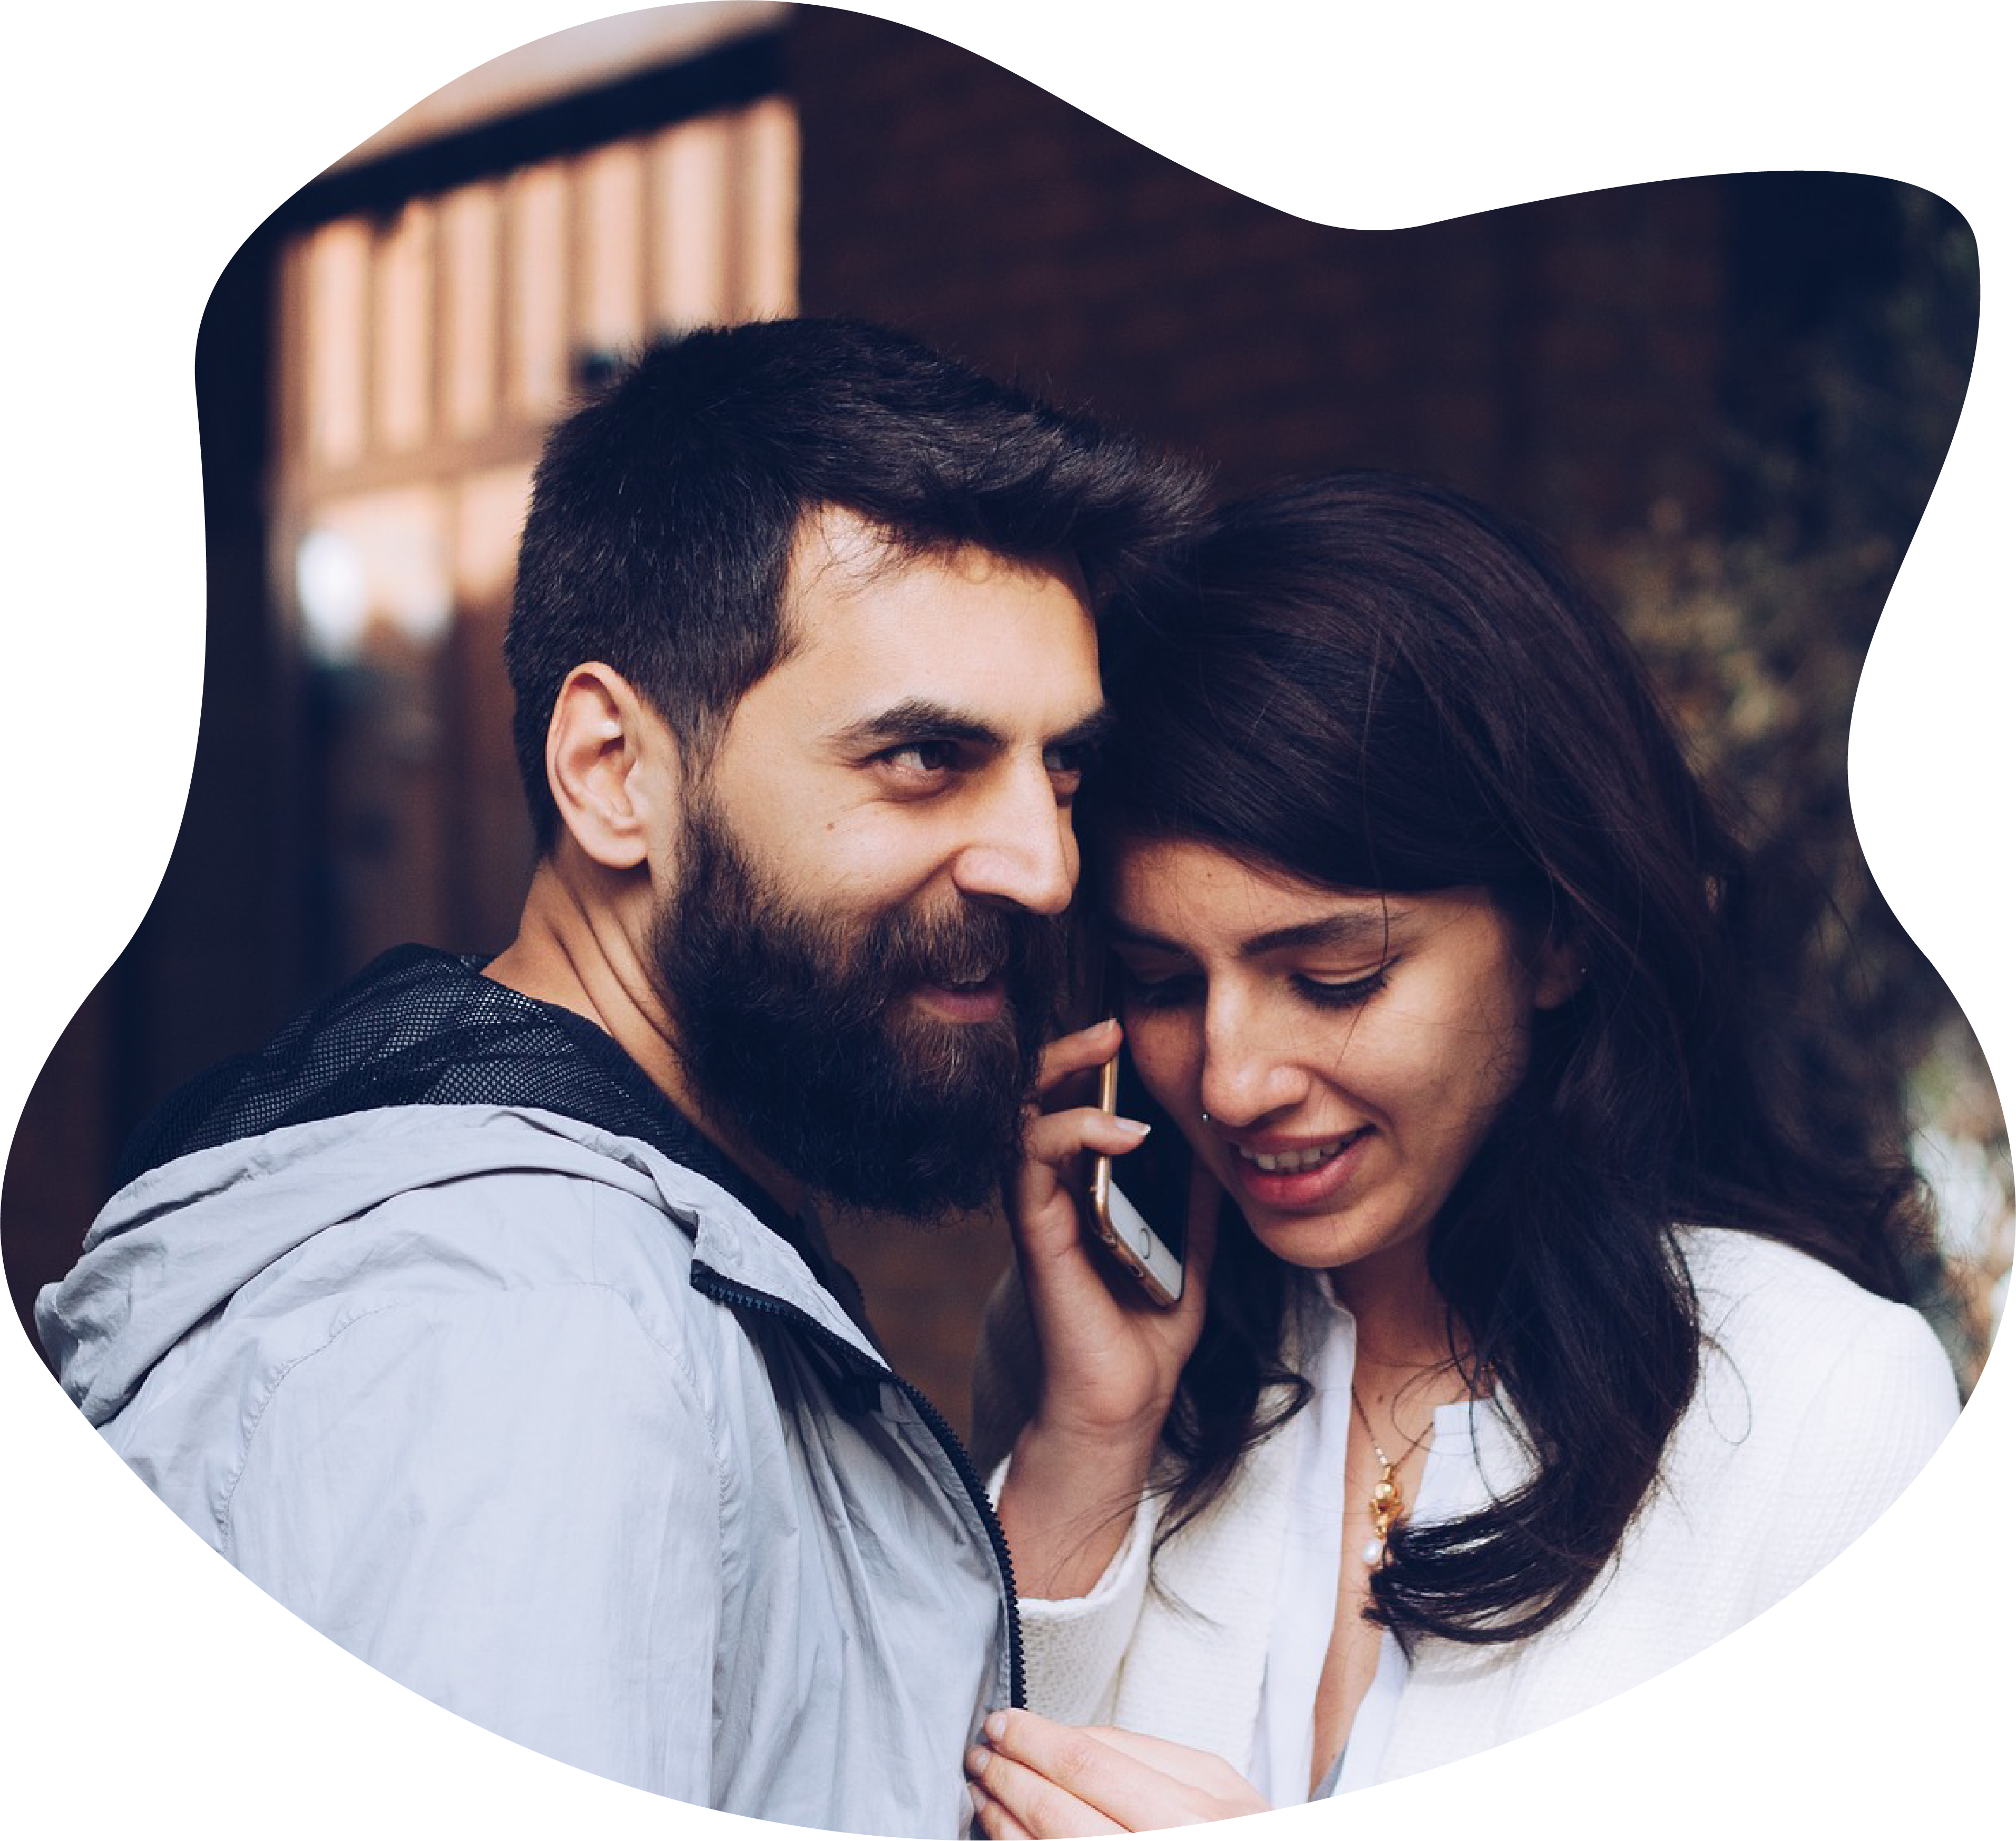 Residential Voice Services Graphic, Image of a couple happily engaged in a phone call